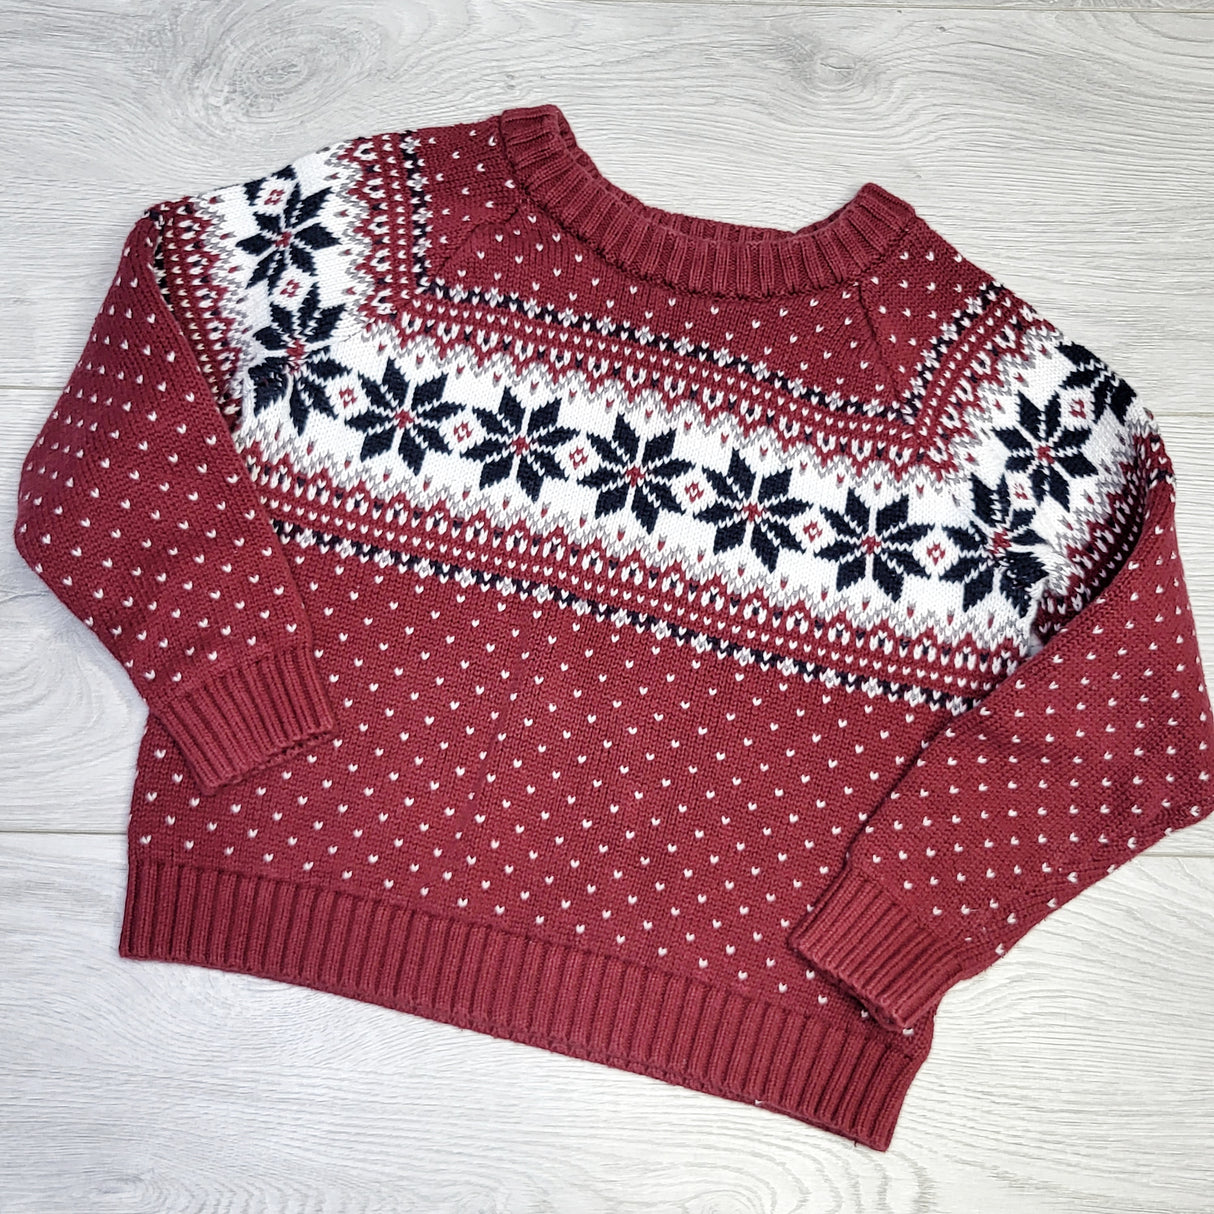 KJHN1 - Old Navy red sweater with snowflakes. Size 5T